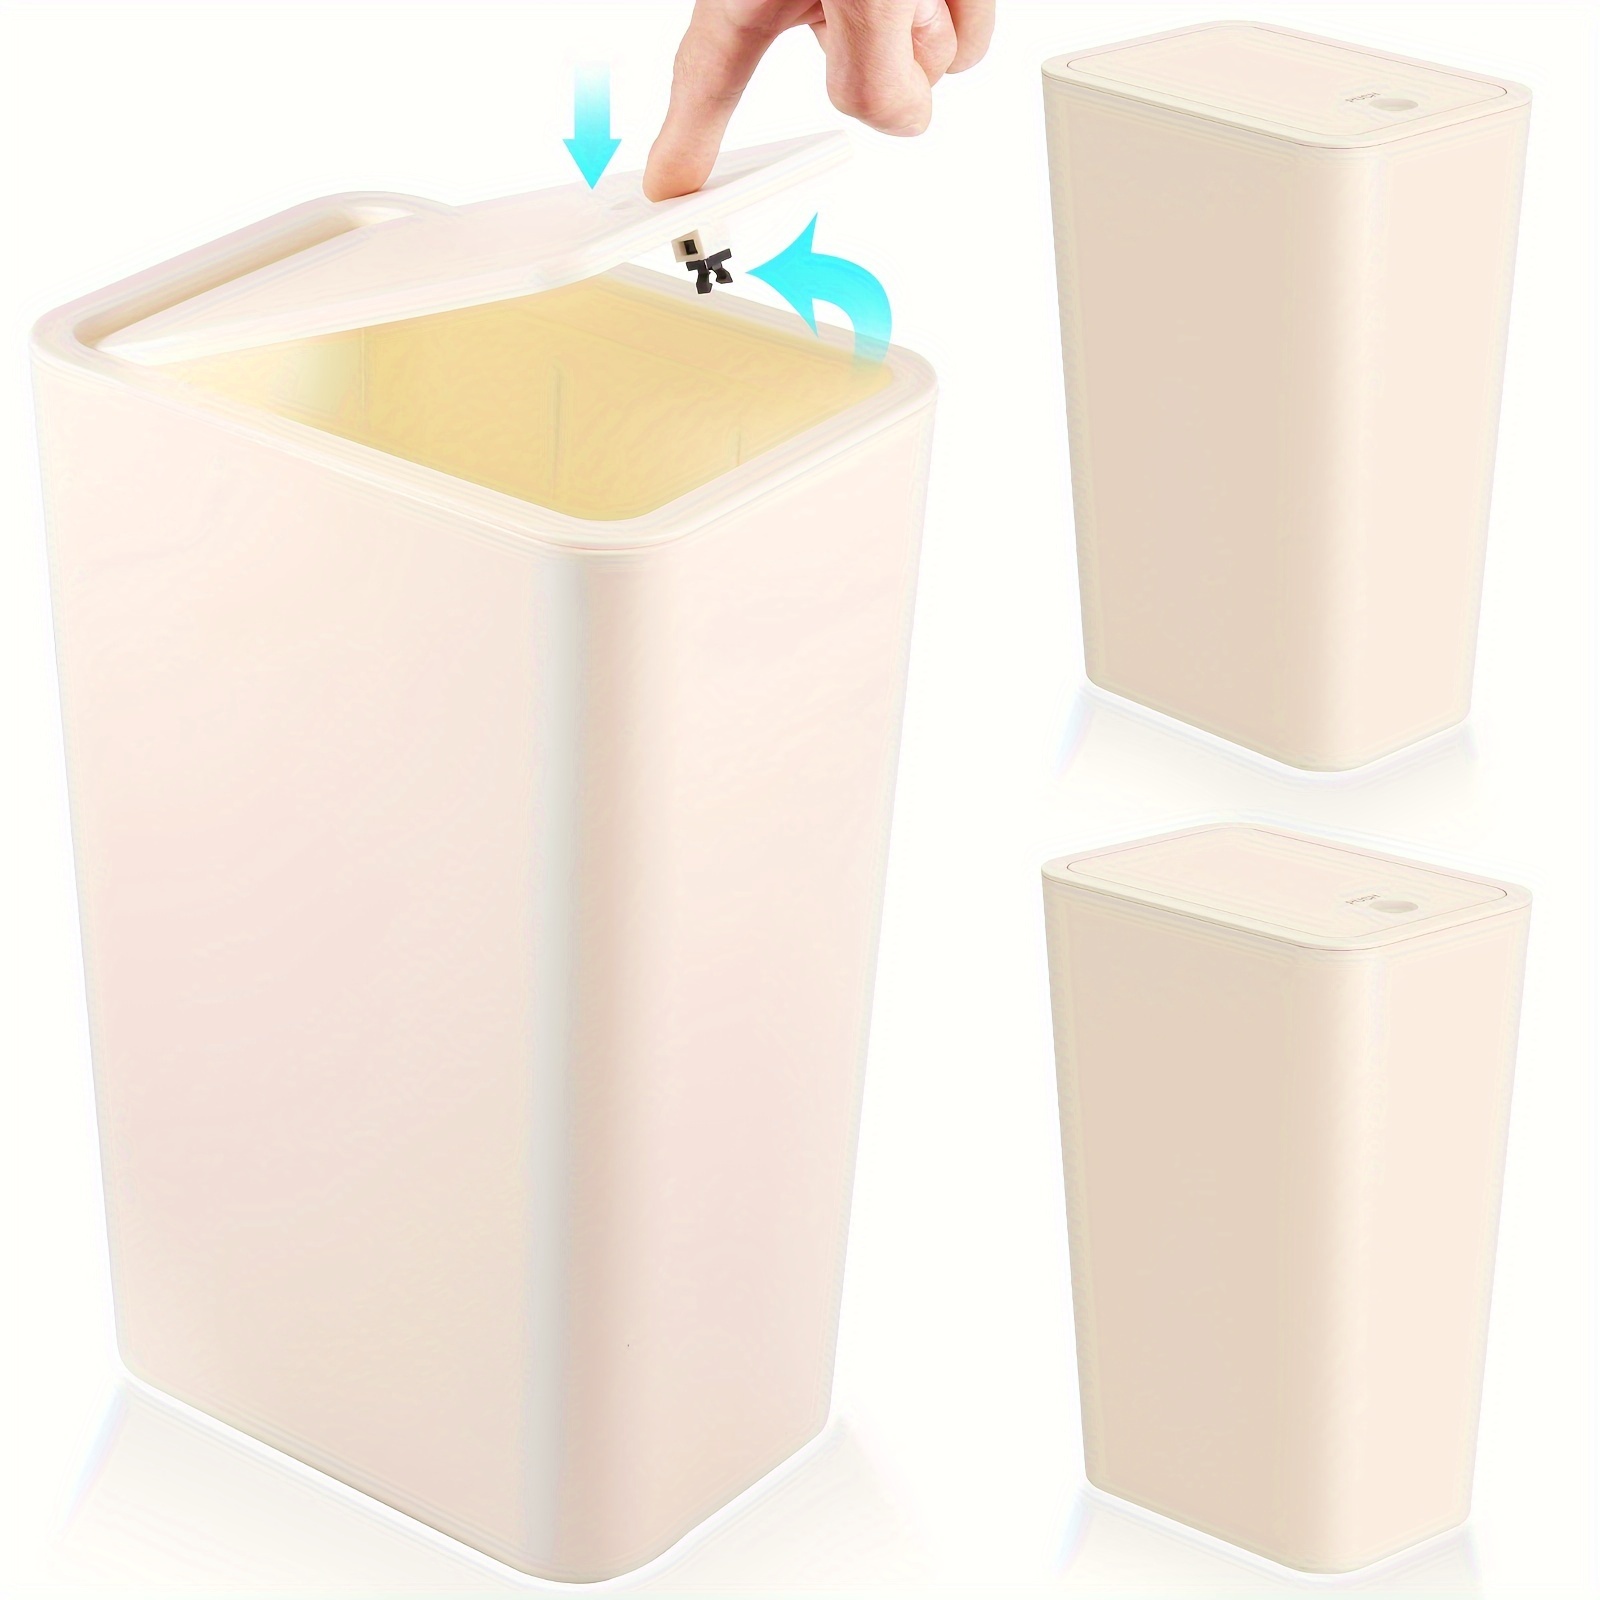 Small Trash Can Open Top Skinny Garbage Cans for Kitchen, Office, Dorm, Bathroom, etc. Slim Waste Can for Compact/Tight Spaces The Perfect Bathroom